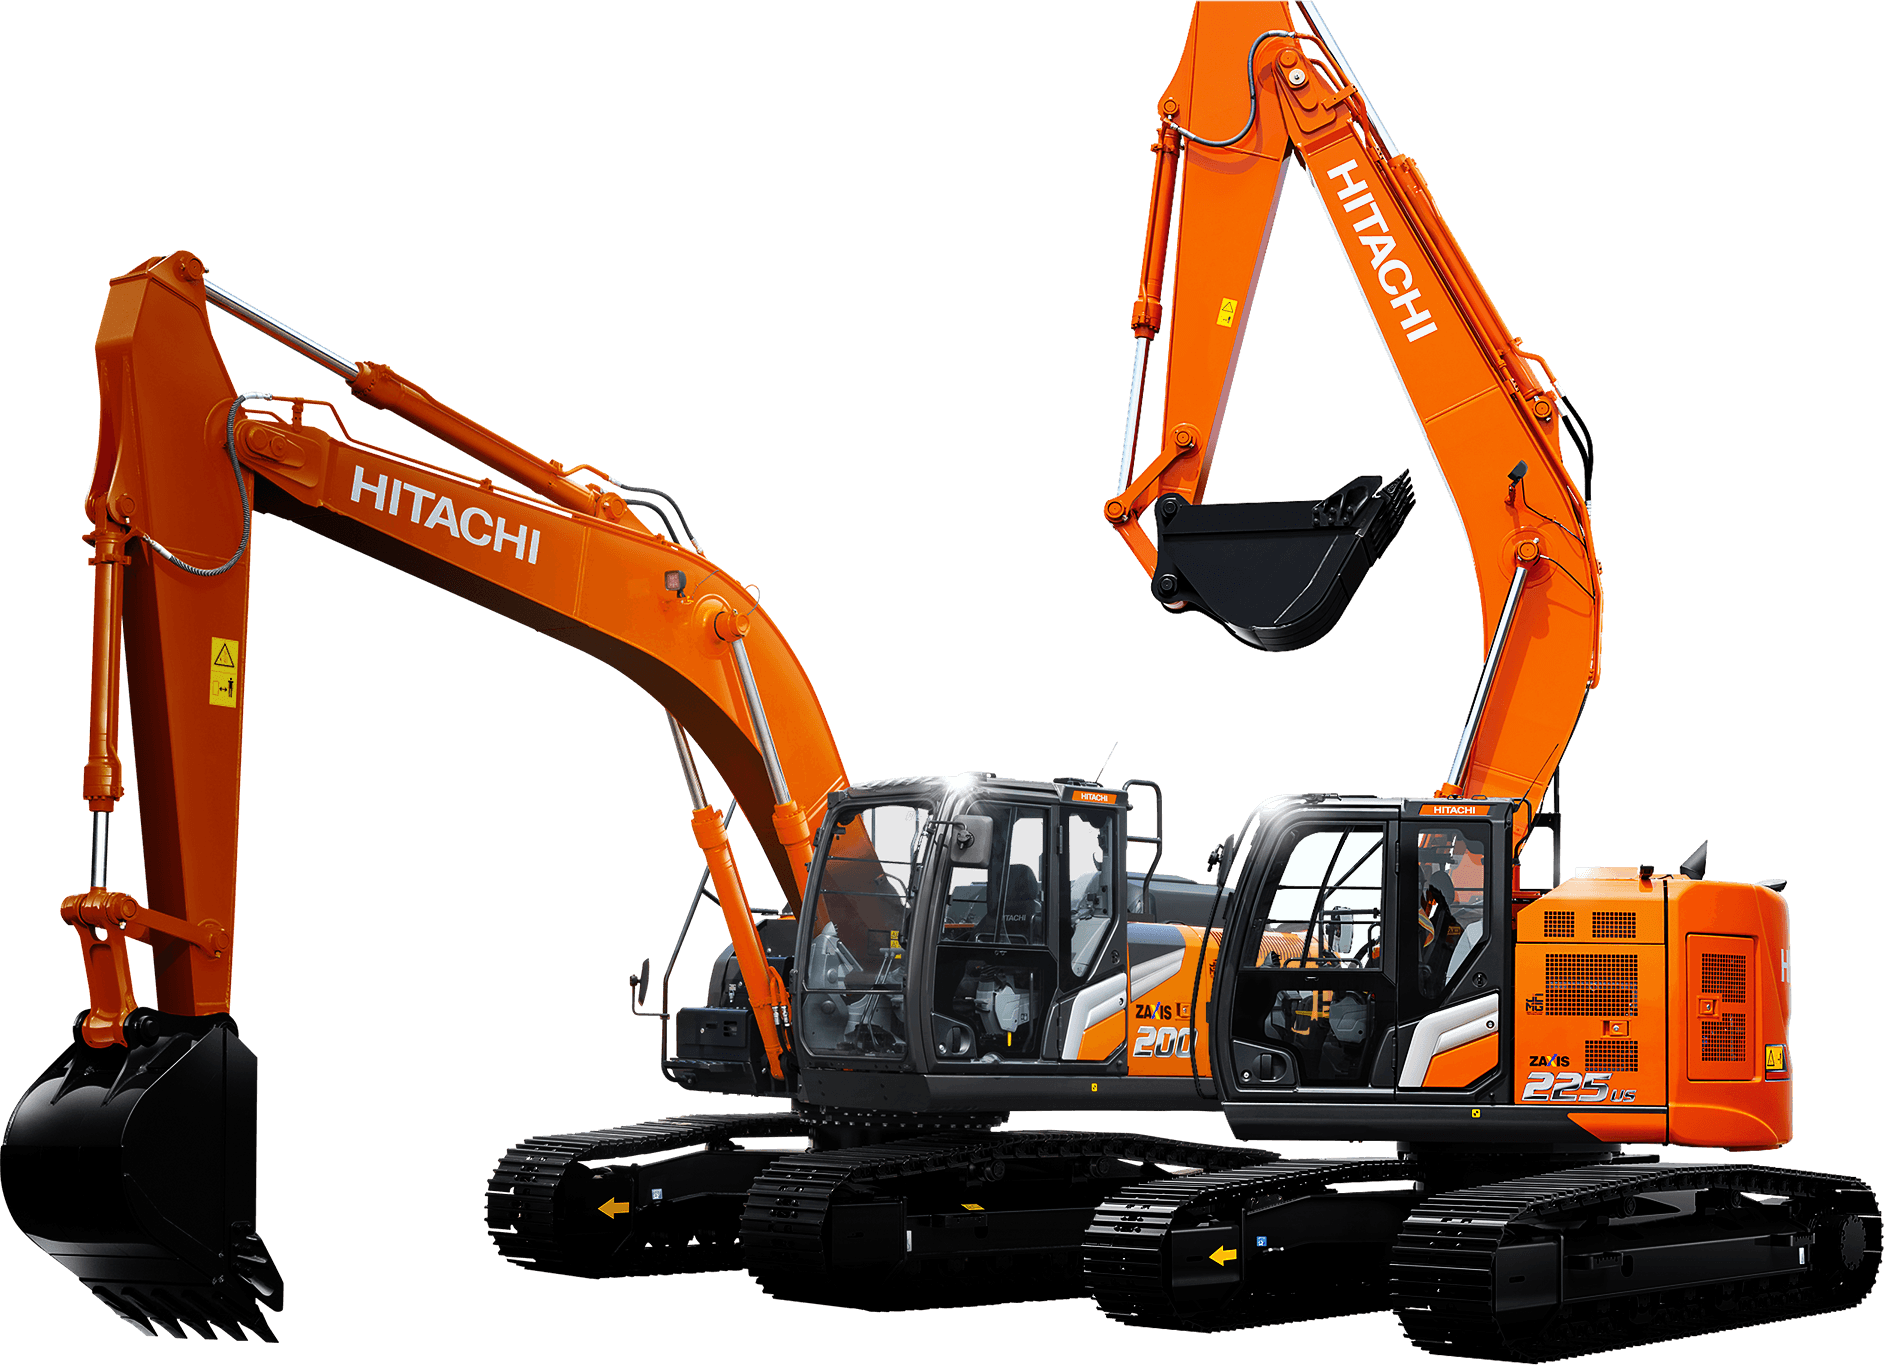 ZAXIS 7 SERIES 新型ZAXIS-7シリーズが、新登場 その手で、革新を操れ 